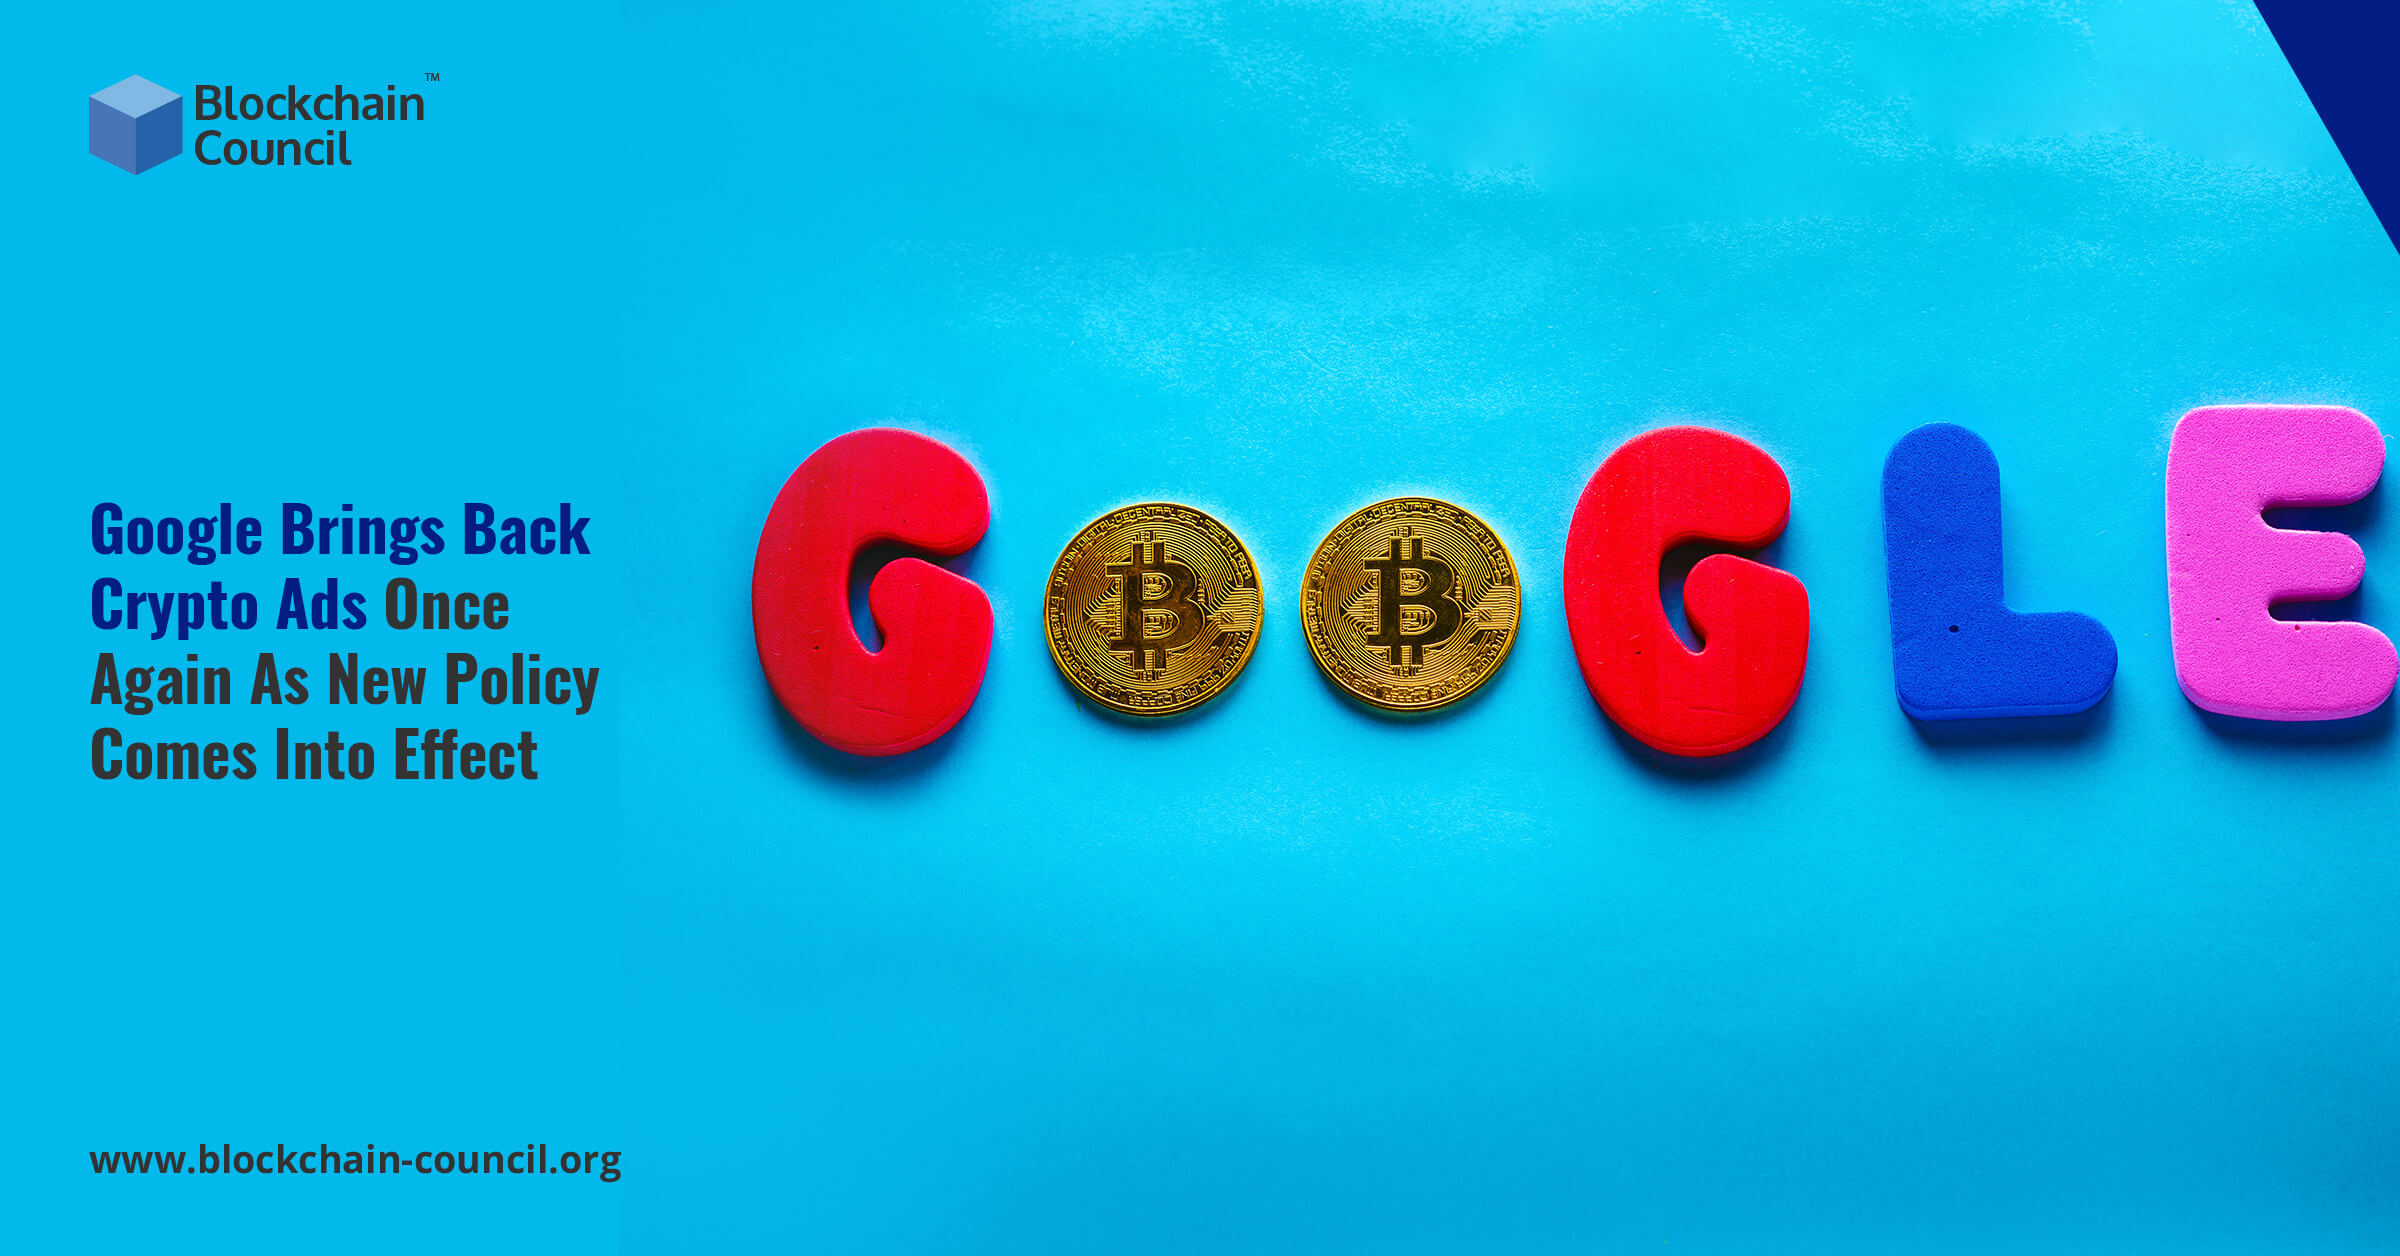 Google Brings Back Crypto Ads Once Again As New Policy Comes Into Effect